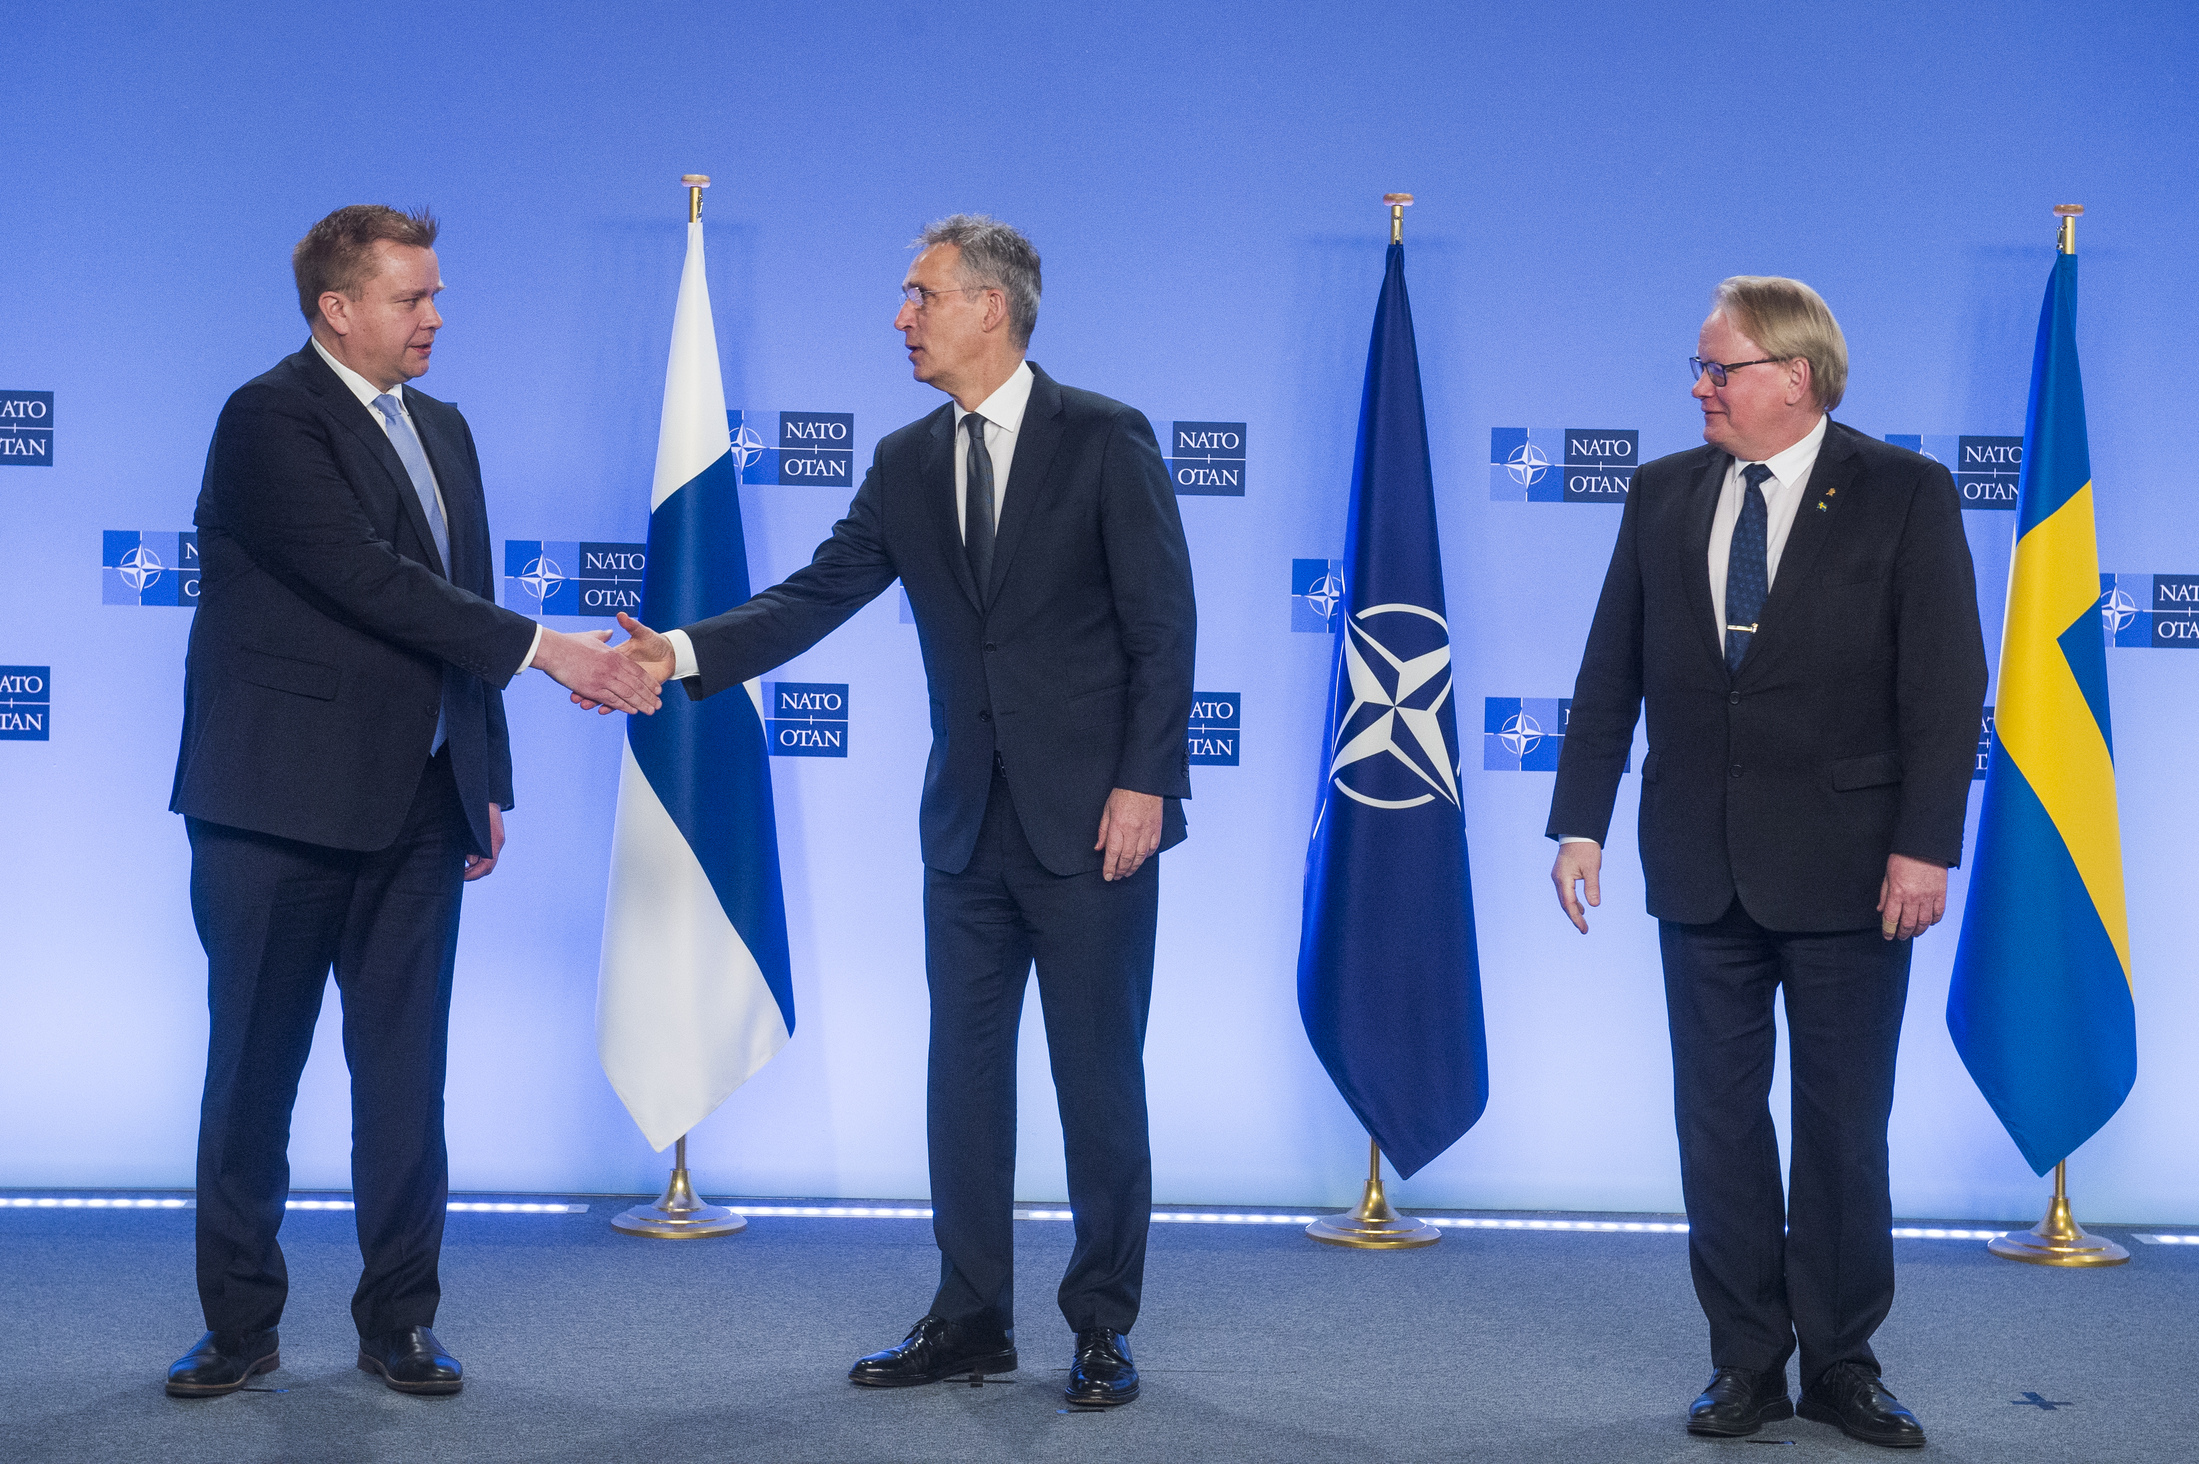 Antti Kaikkonen, Finnish Minister of Defence and Peter Hultgyjst, Swedish Miniter of Defence with NATO Secretary General Jens Stoltenberg during a summit following Russia’s full-scale invasion of Ukraine in Brussels, 16 March 2022. © NATO North Atlantic Treaty Organization via Flickr. 